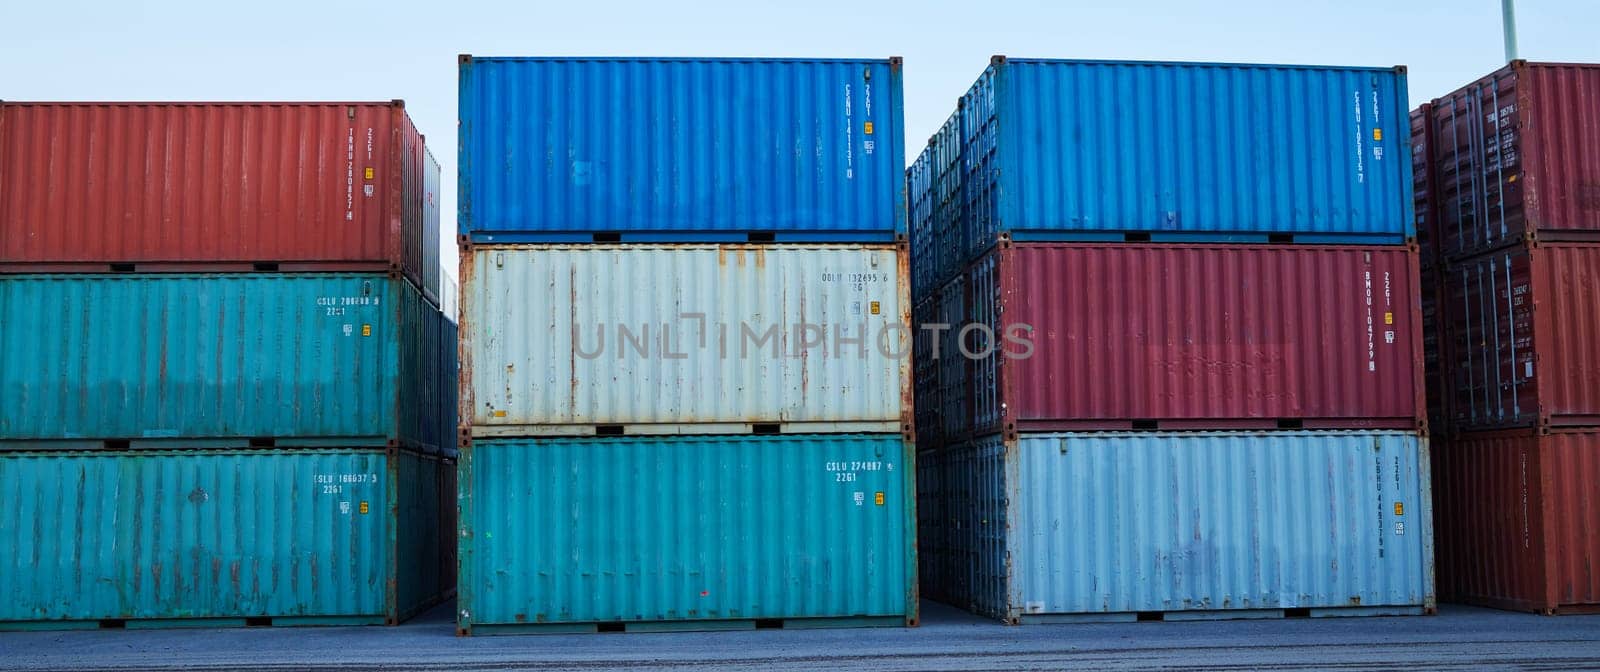 Industrial container cargo port, commercial trade and or international export and outdoor warehouse. Commercial logistics, industry inventory and global supply chain shipping management factory.